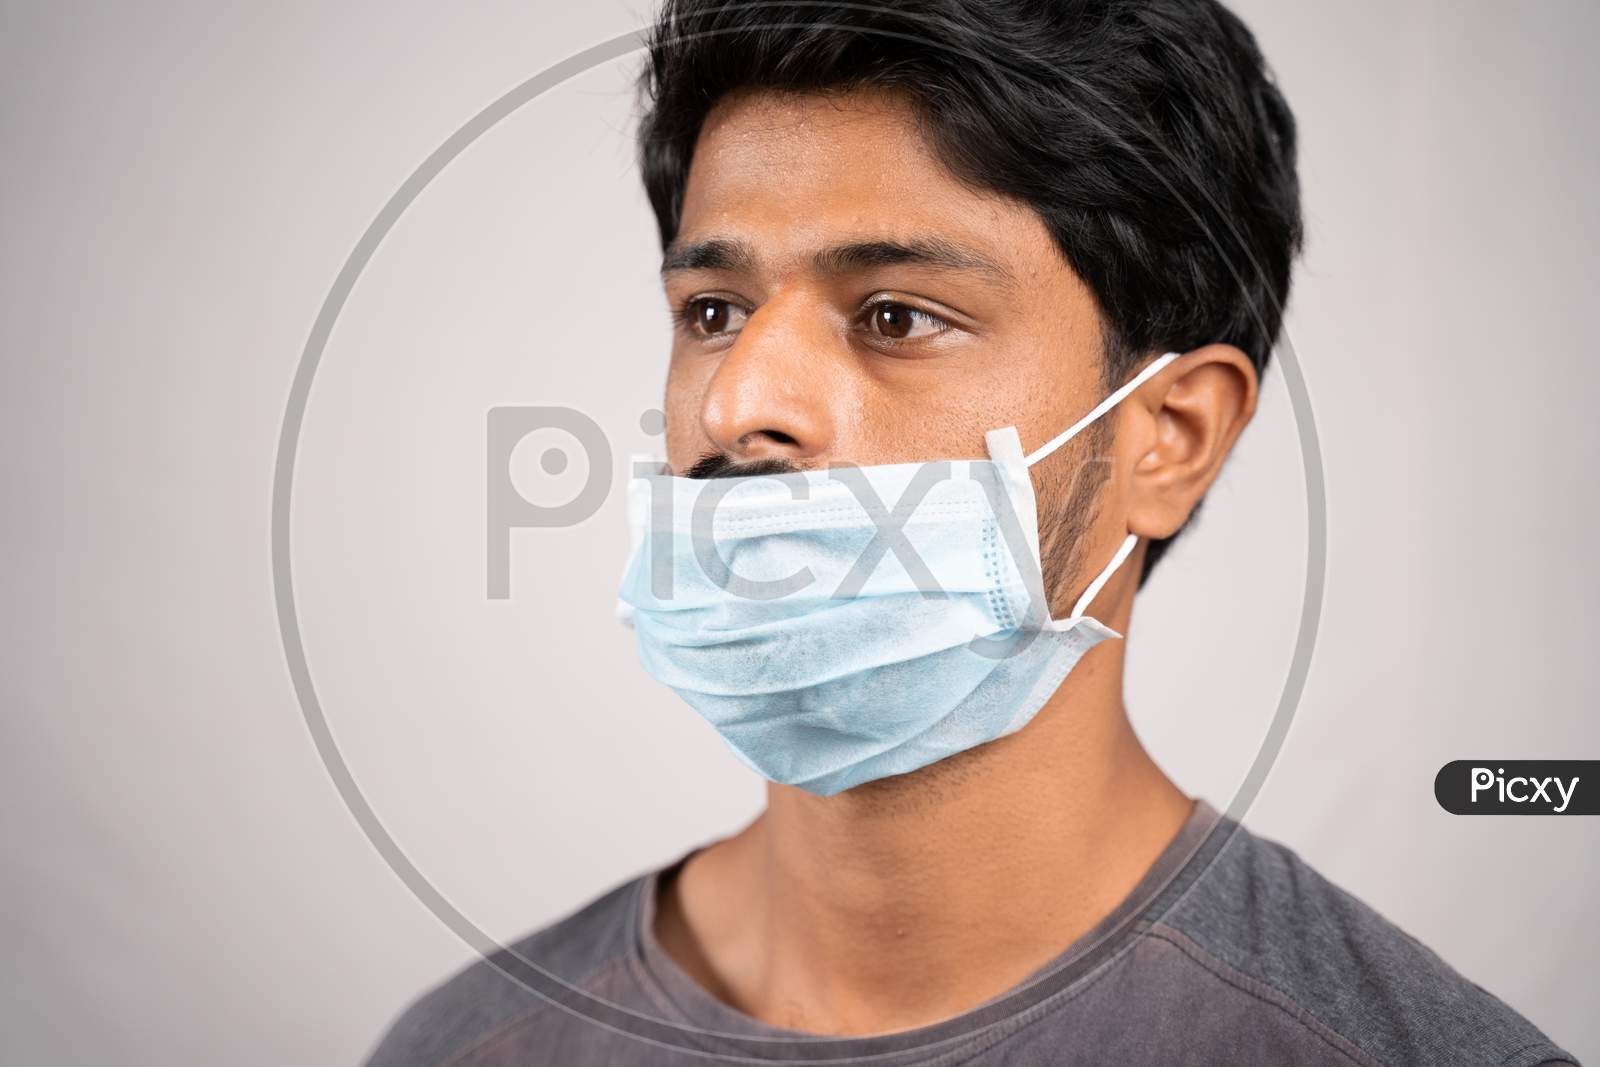 Young Man Wearing Medical Mask Below Nose - Concept Showing Of Improper Way Of Using Face Masks During Coronavirus Or Covid-19 Crisis.